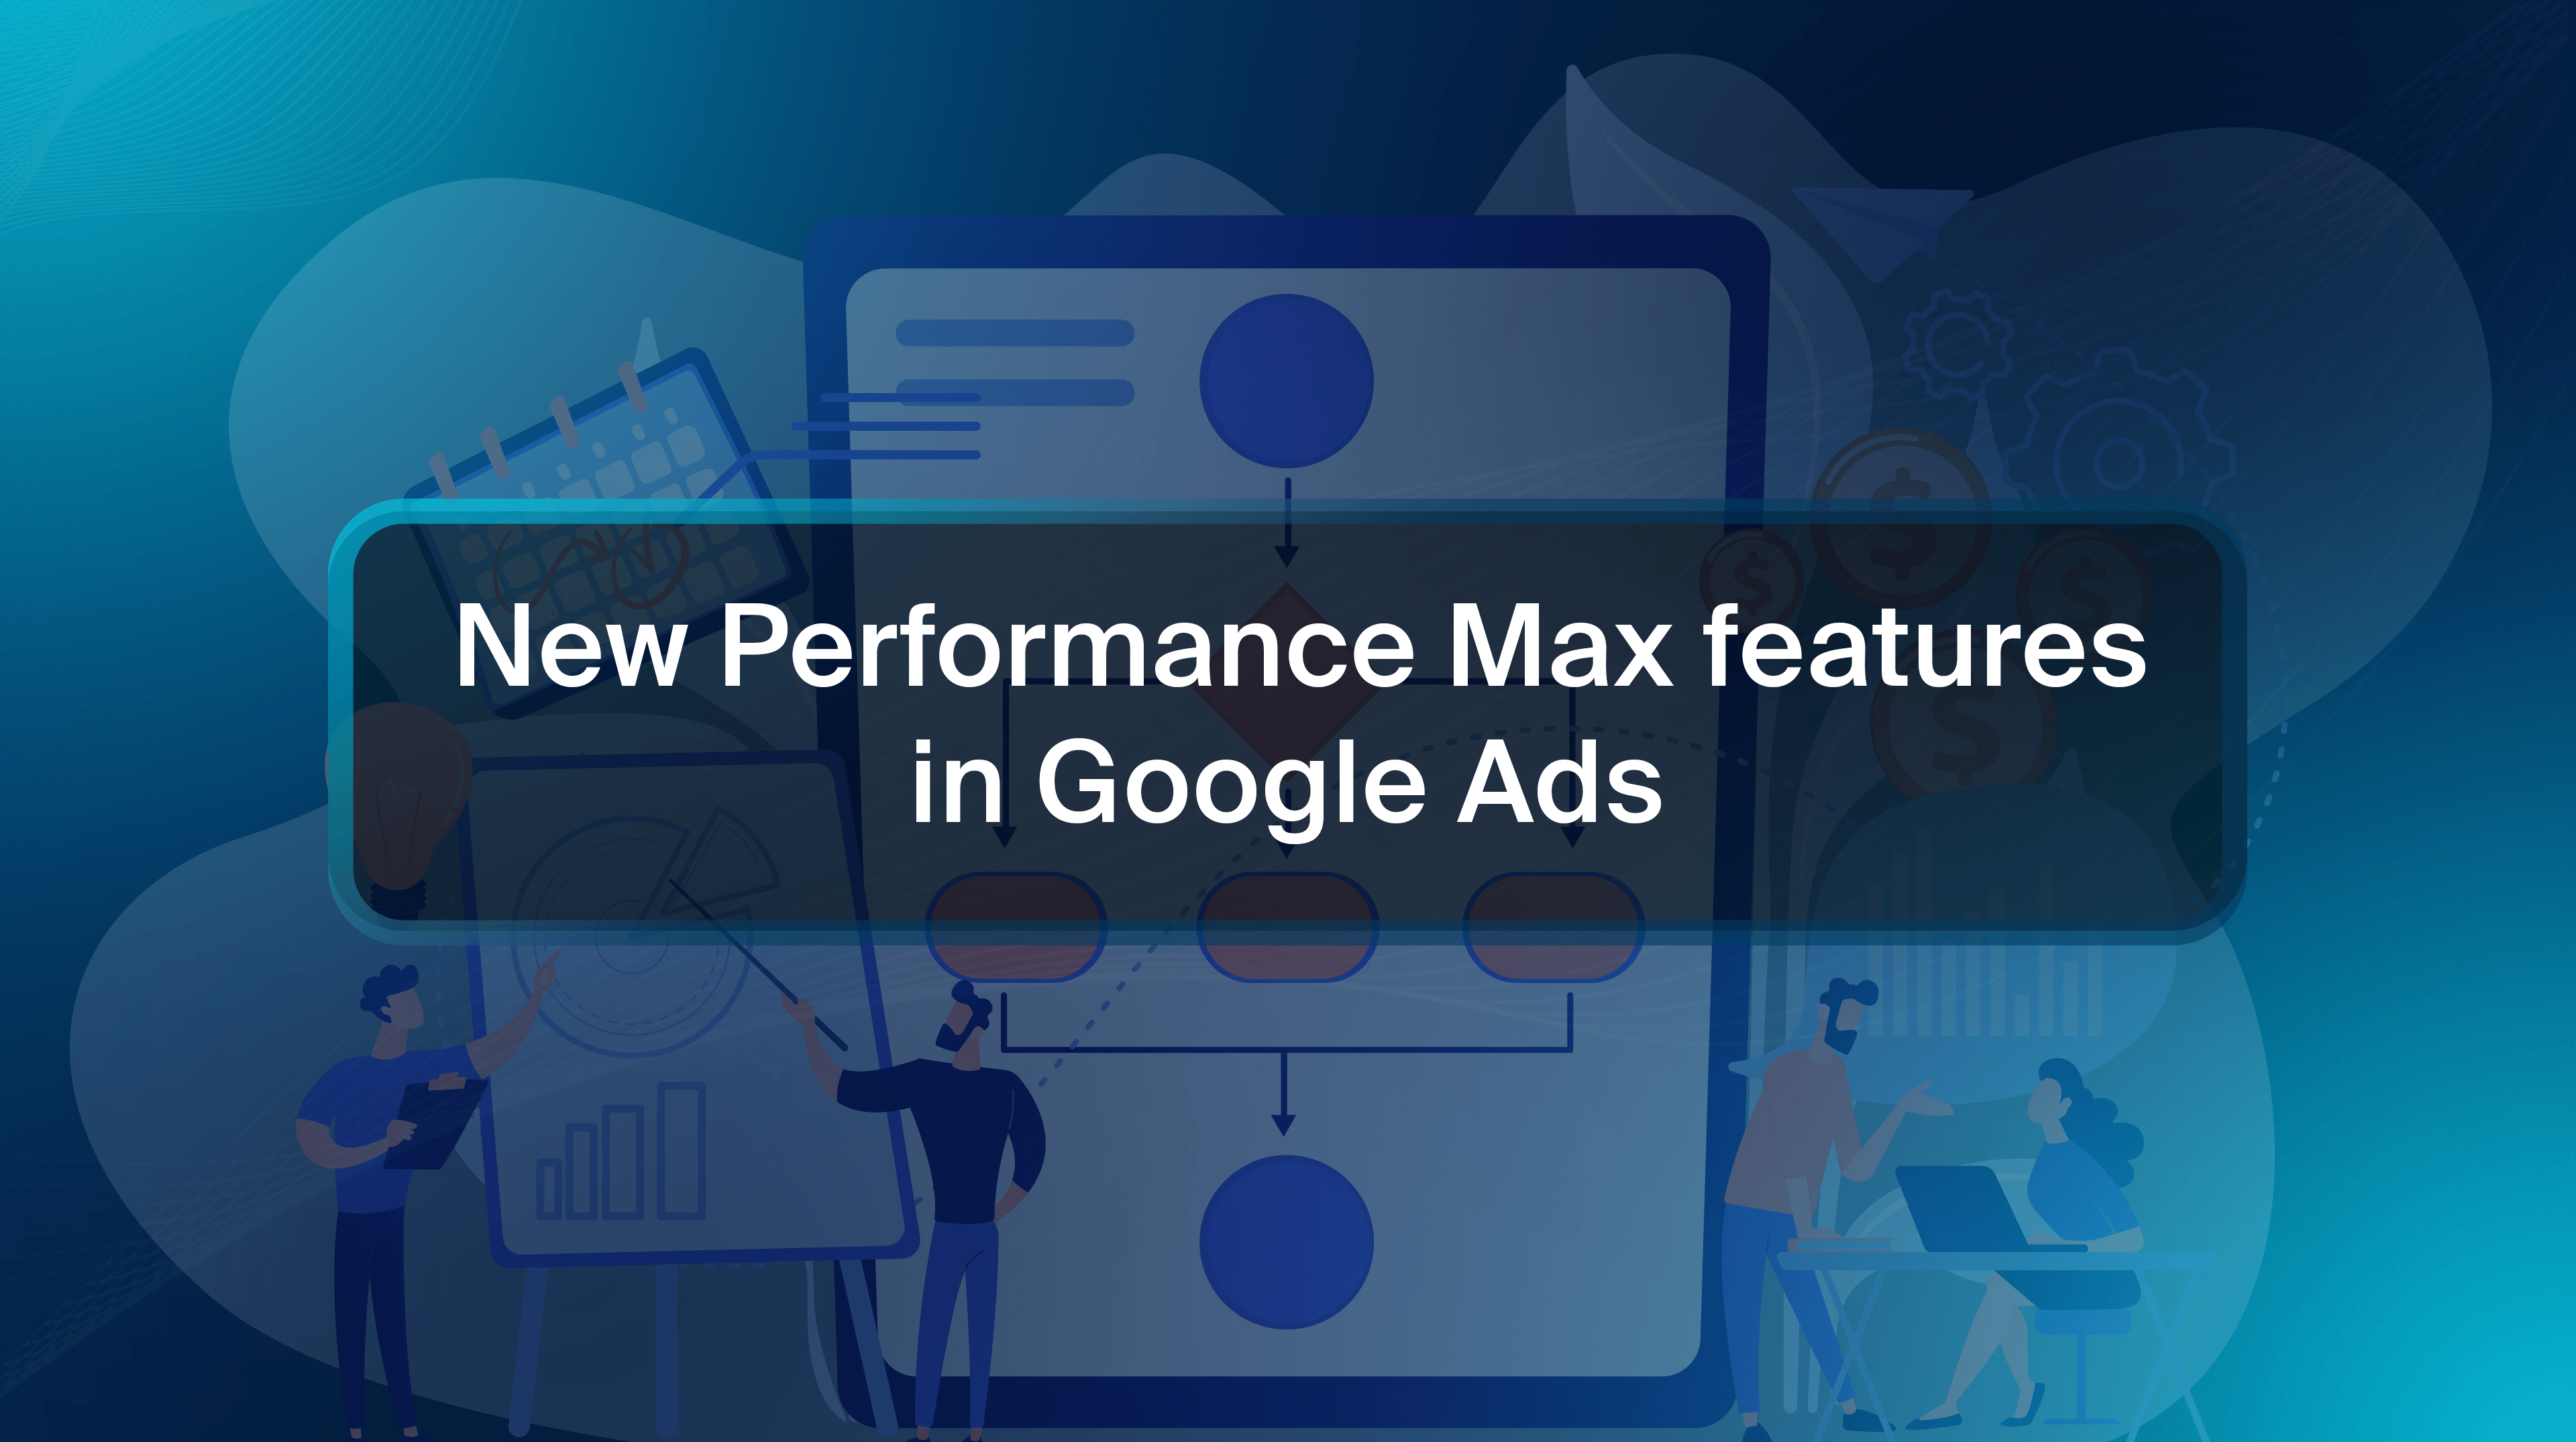 New Performance Max features in Google Ads